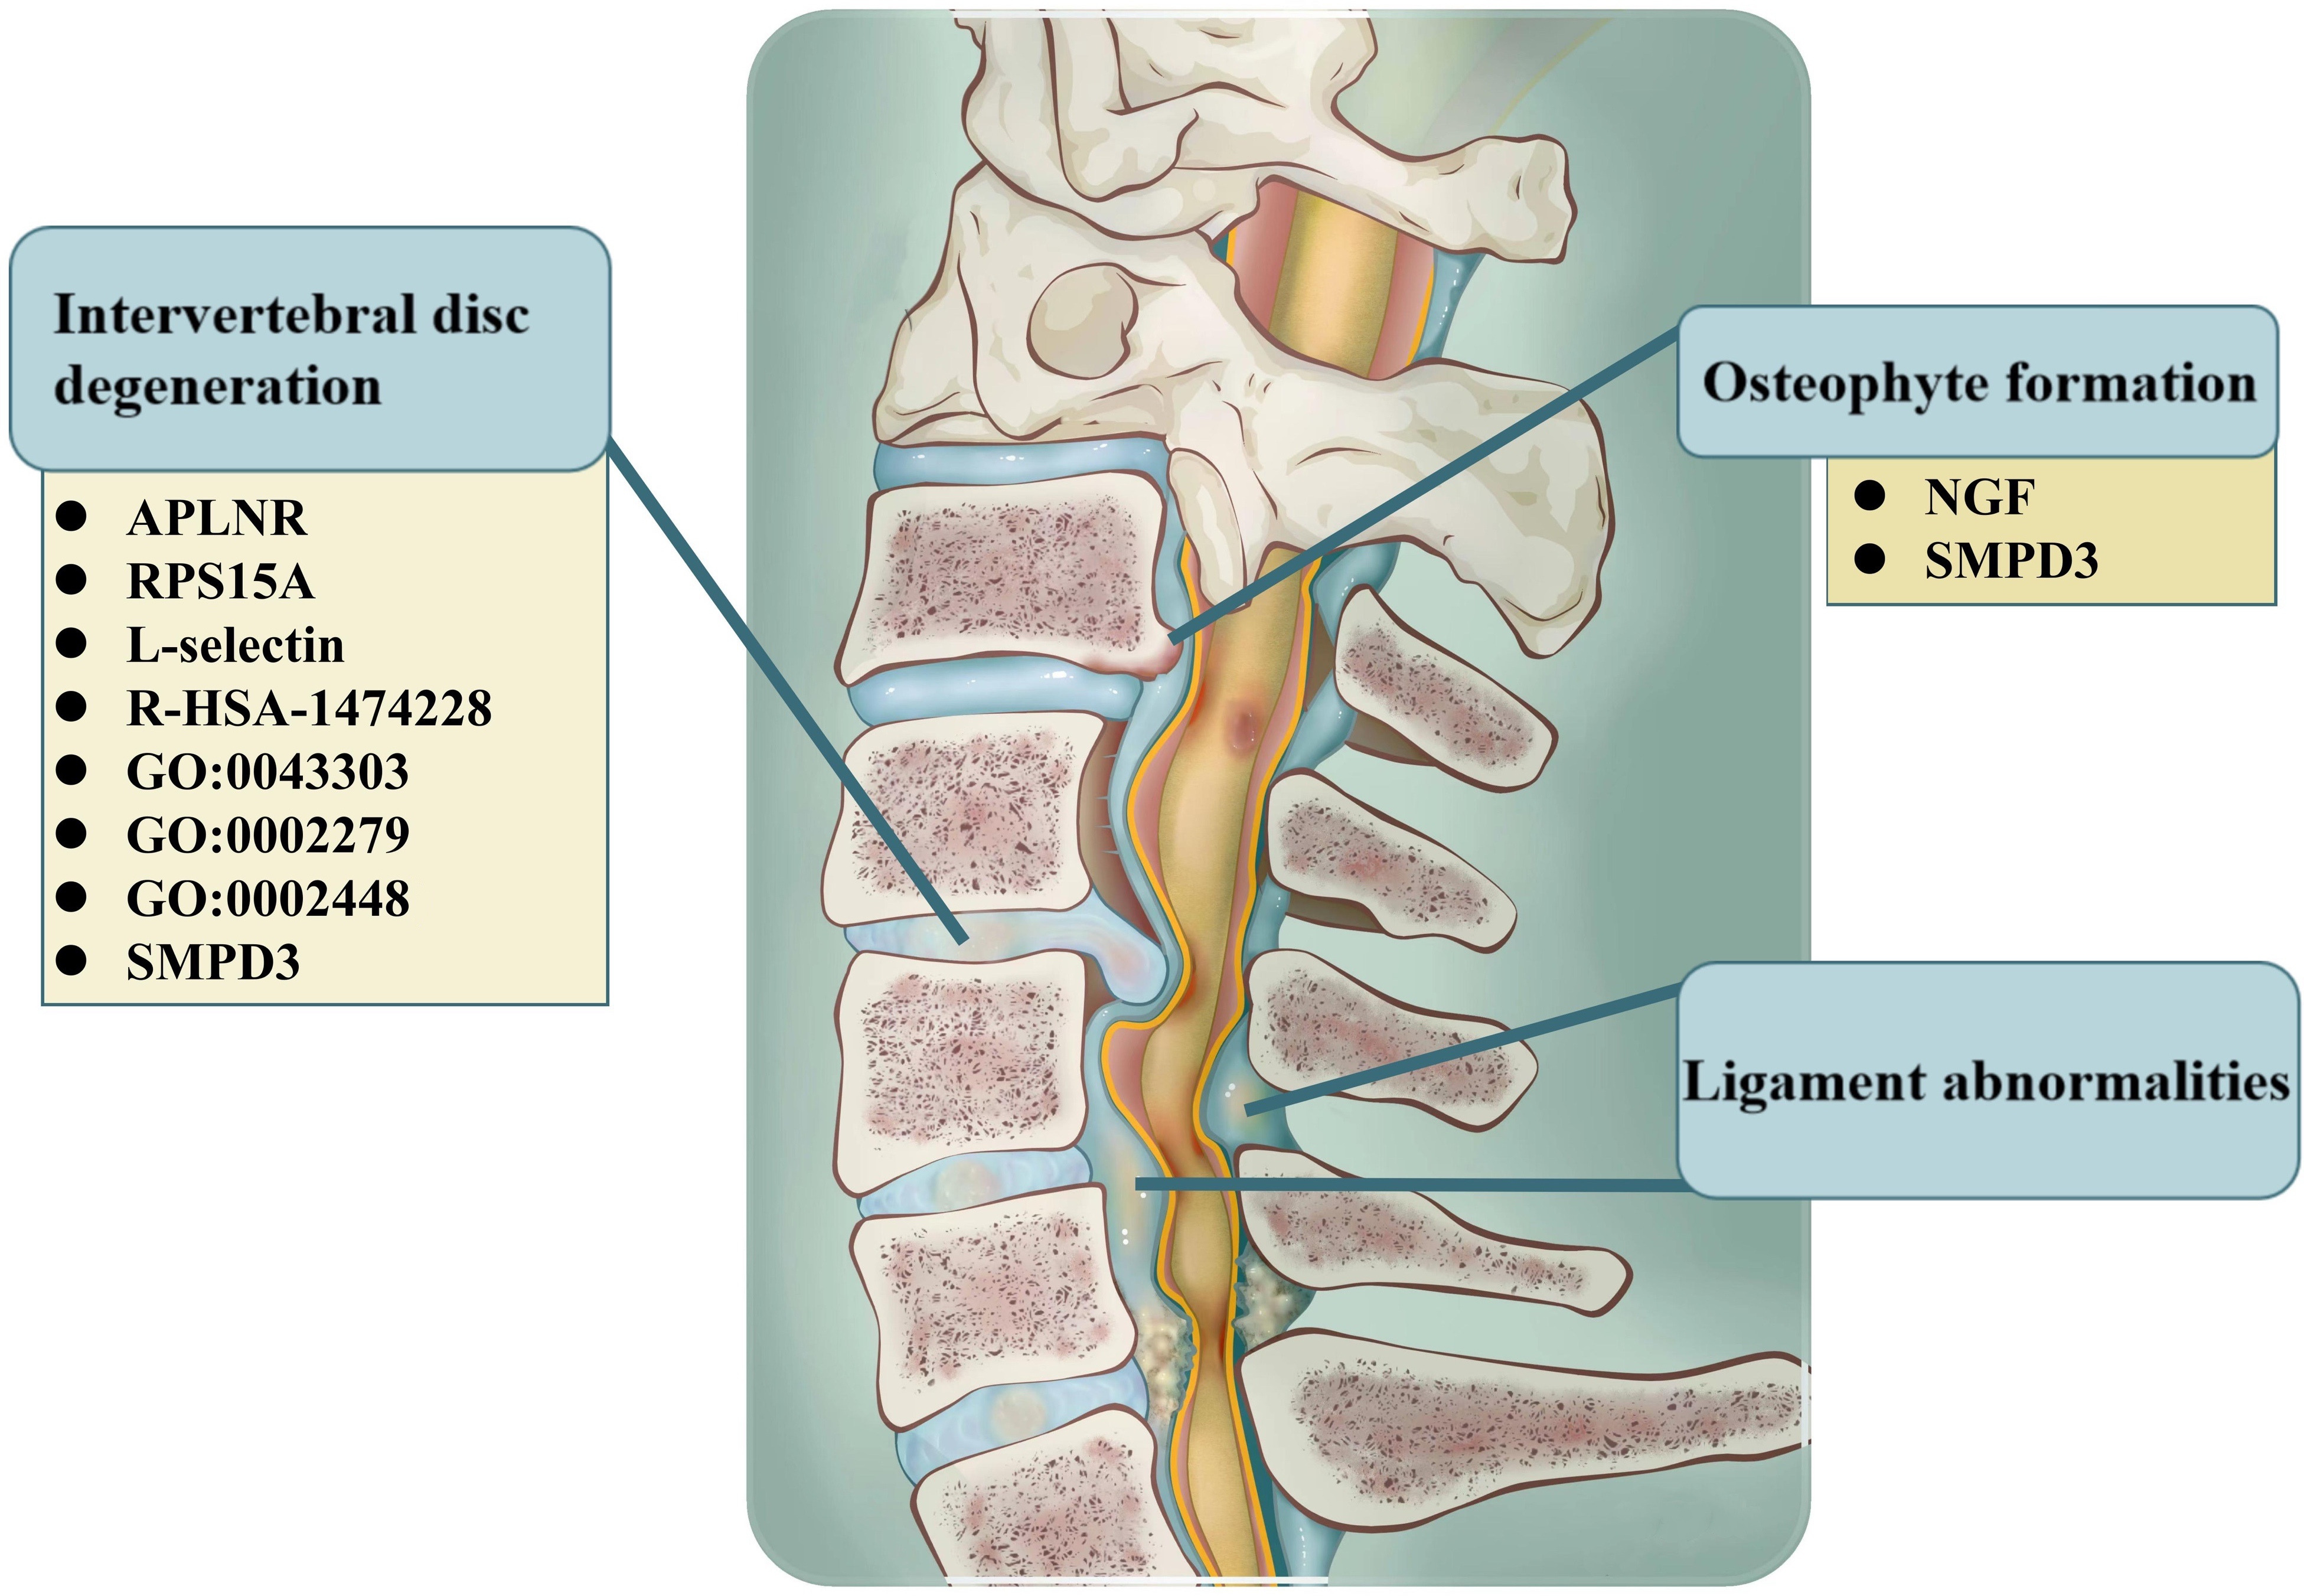 Fig. 5 
          The correlation between genetic variation and the major pathological changes of degenerative cervical spondylosis (DCS). We detected genes and pathways that may be associated with three major pathological changes in DCS including intervertebral disc degeneration, osteophyte formation, and ligament abnormalities. APLNR, apelin receptor, angiotensin receptor-like 1; HSA, homo sapiens; NGF, nerve growth factor; RPS15A, ribosomal protein S15a; SMPD3, sphingomyelin phosphodiesterase 3.
        